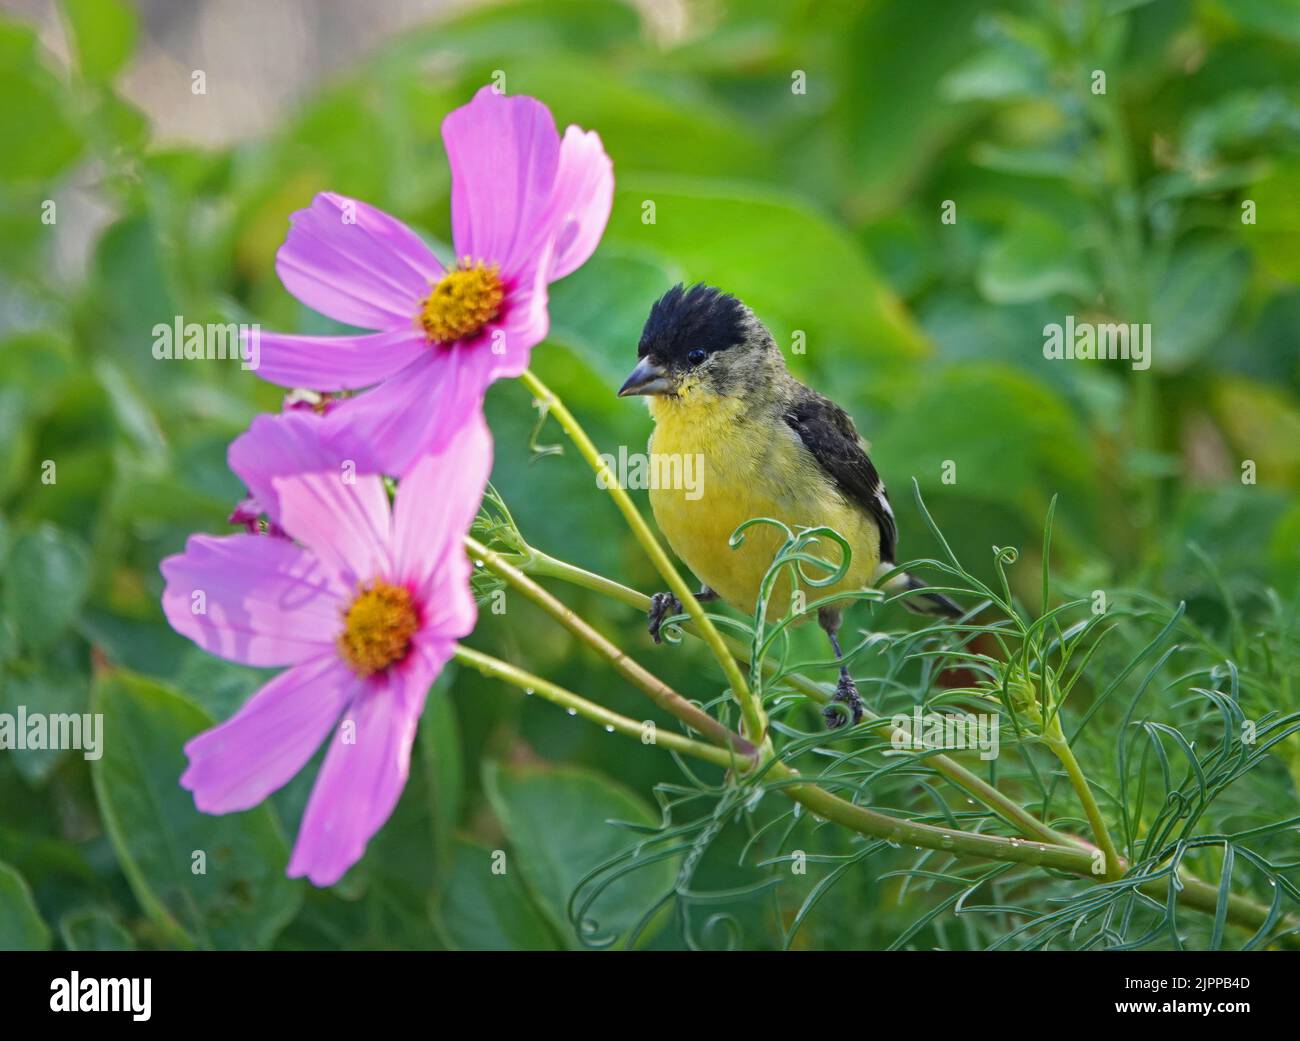 An American goldfinch, Spinus tristis, perched on a swiss chard plant in a garden, drinking water. Stock Photo